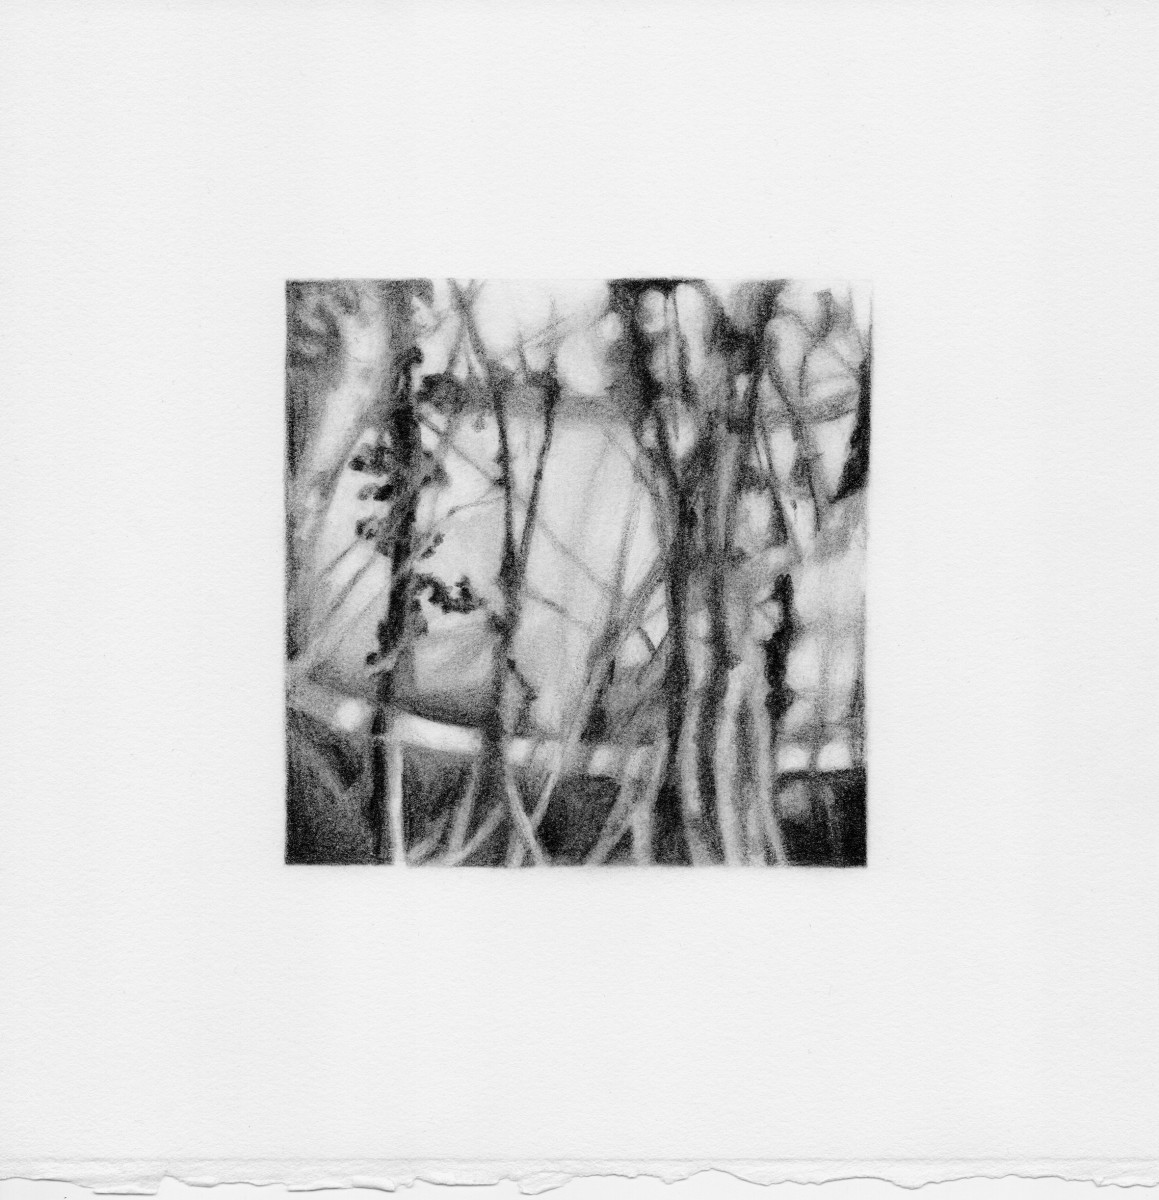 Camille Gillyboeuf, Roots, 2022, 10 x 10 cm image size, 20 x 20 cm paper size